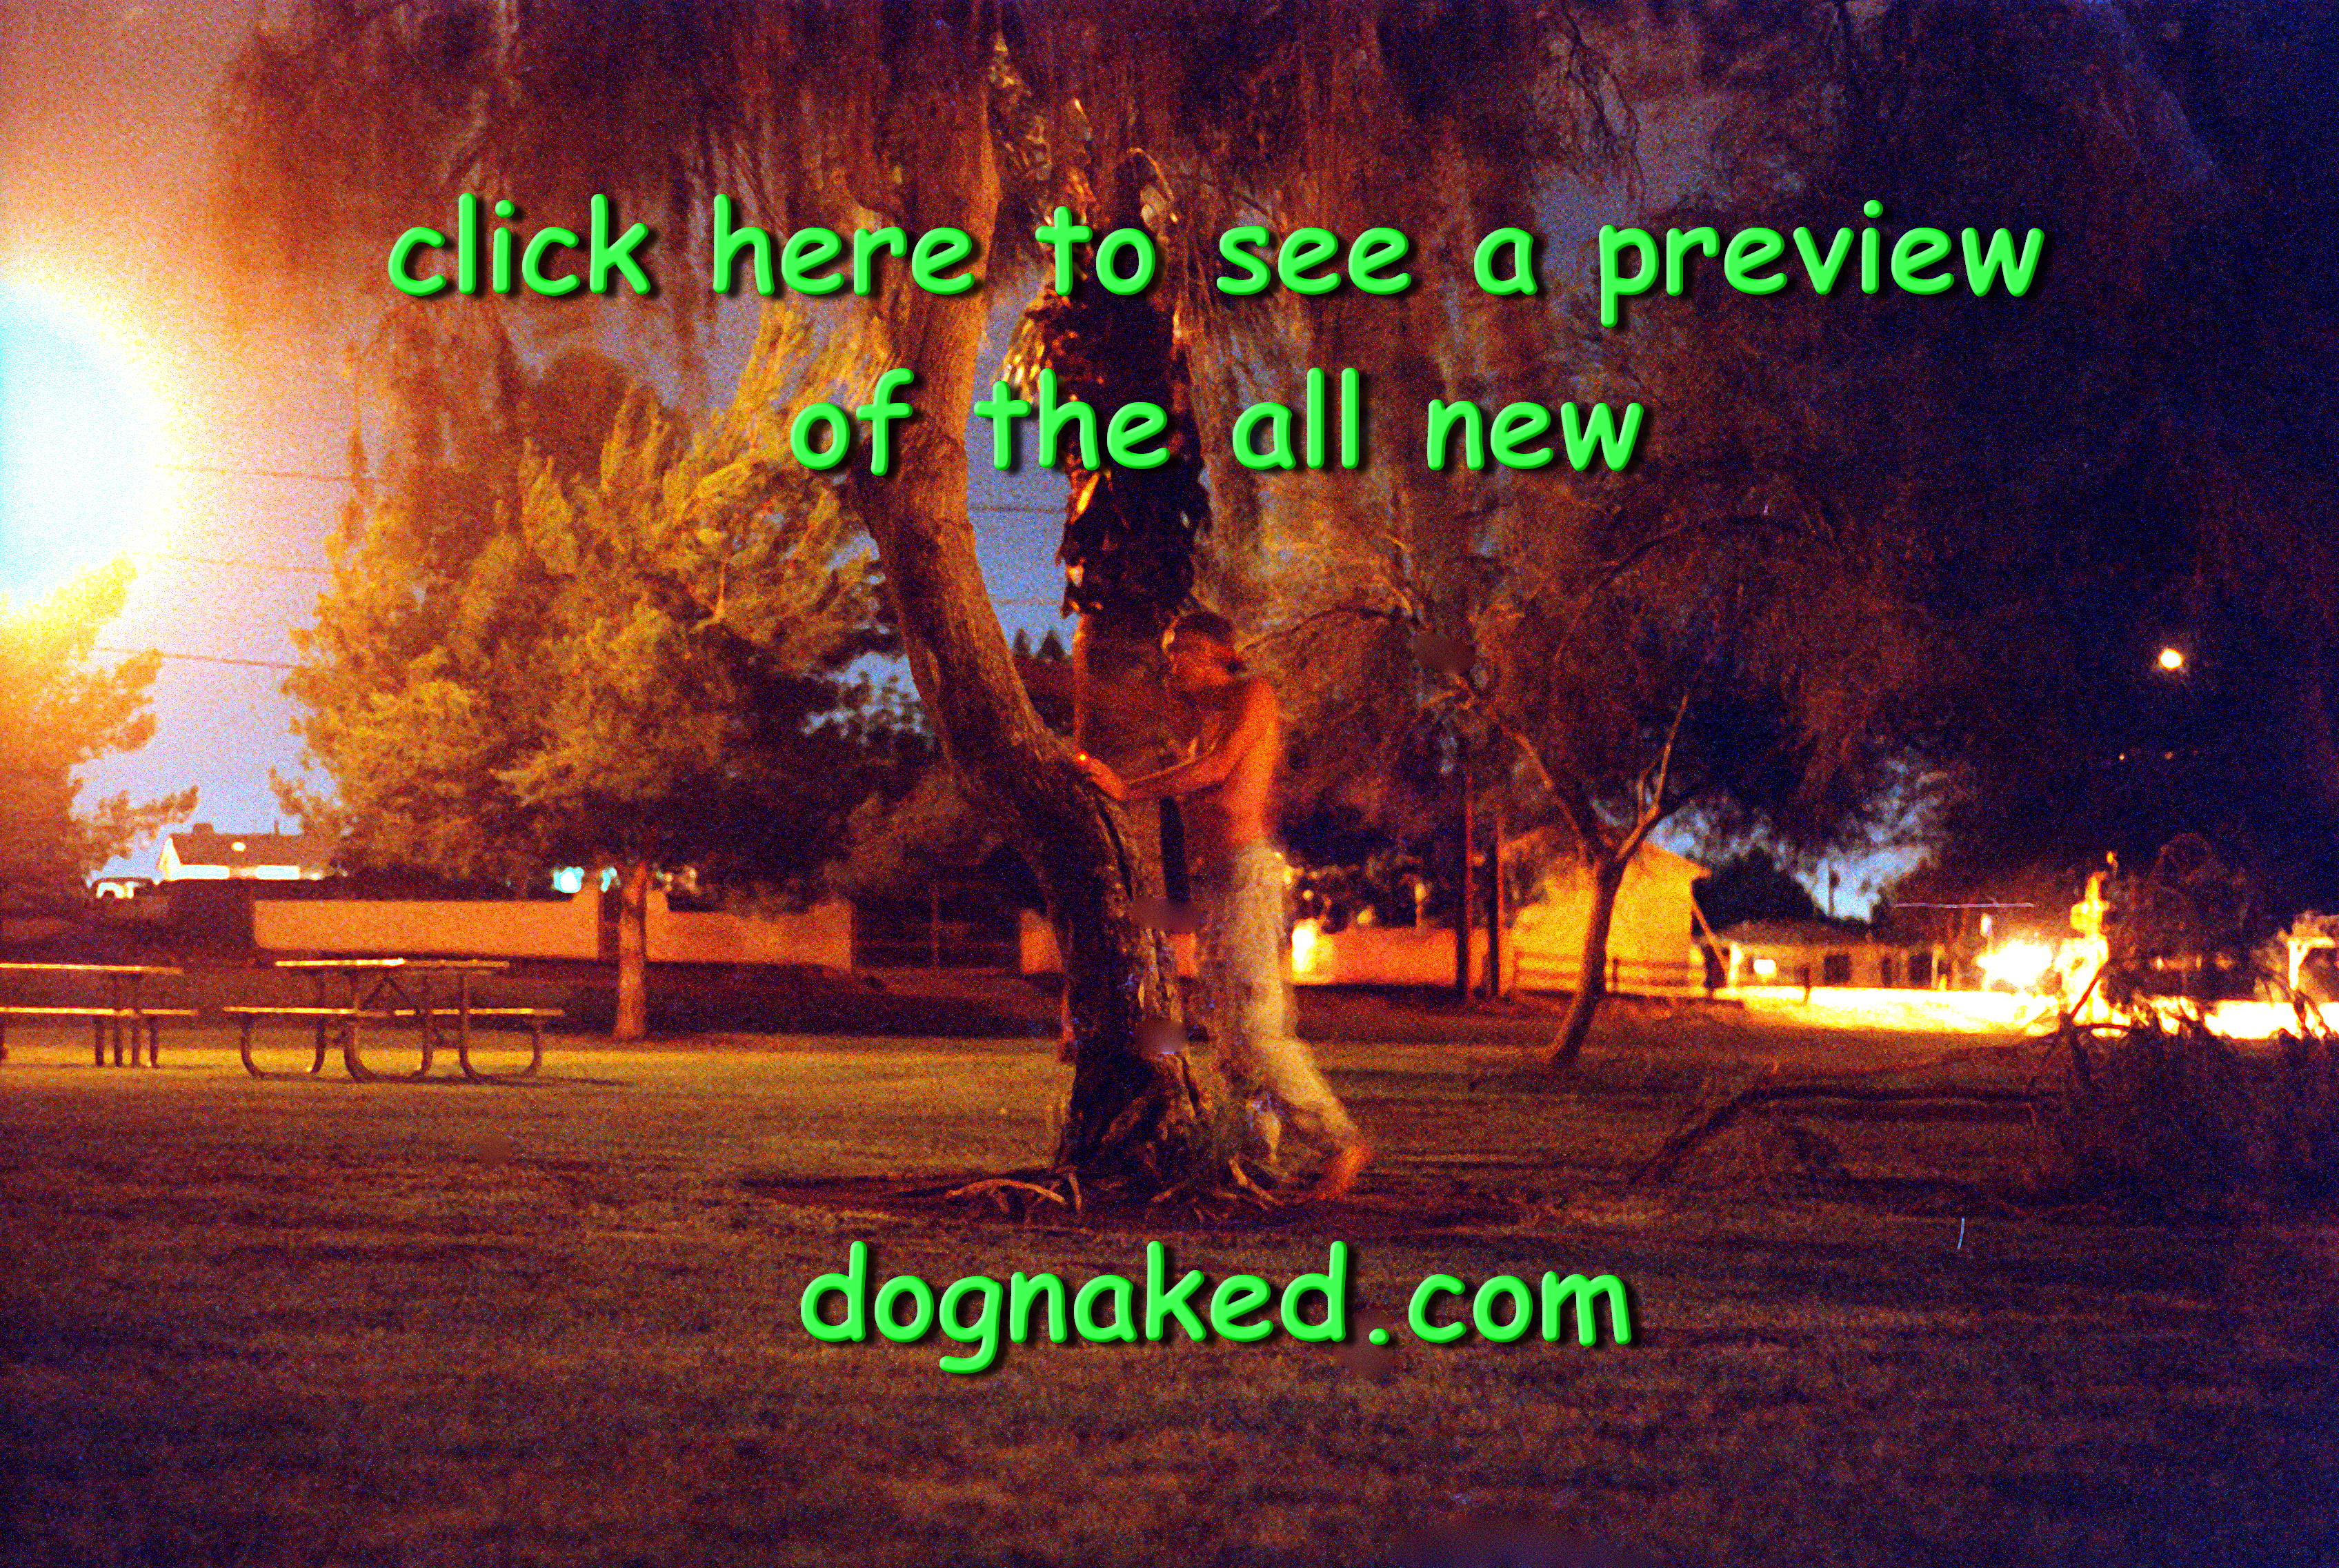 NEW DOGNAKED PREVIEW